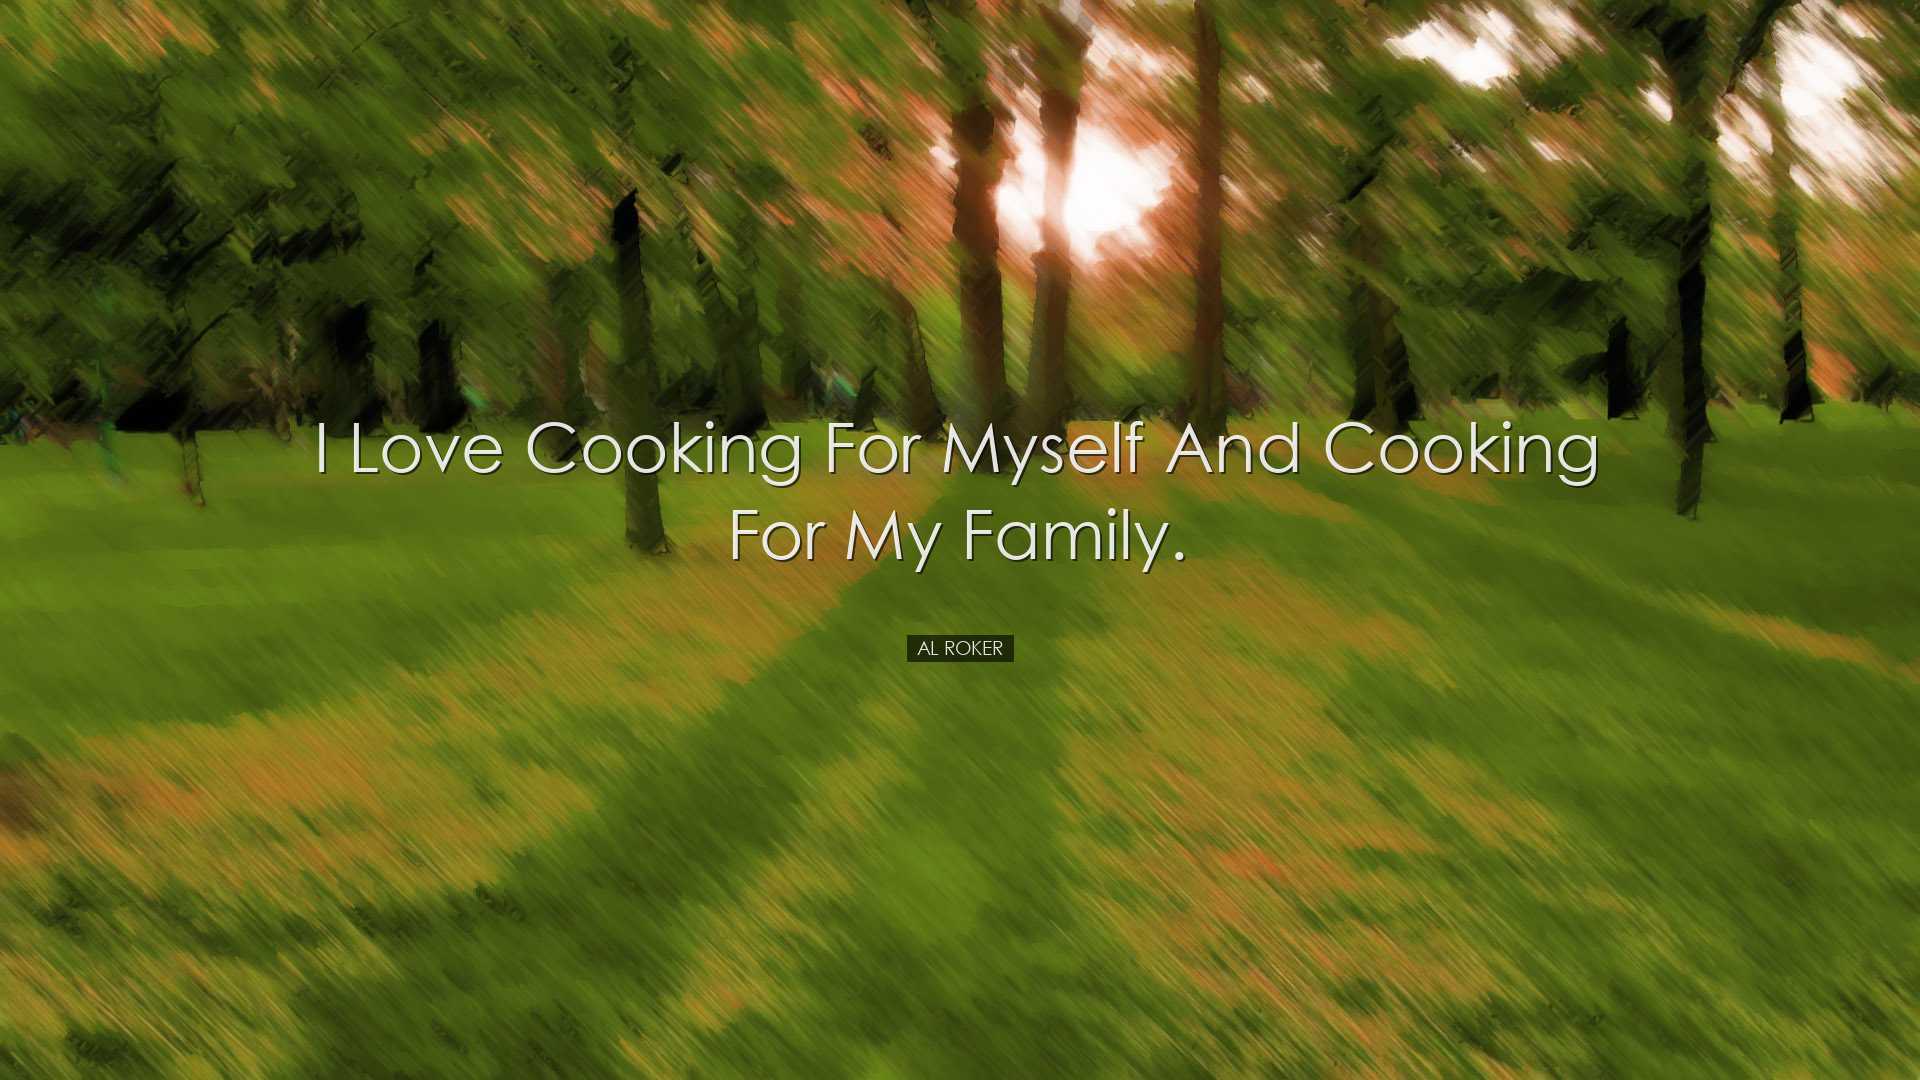 I love cooking for myself and cooking for my family. - Al Roker